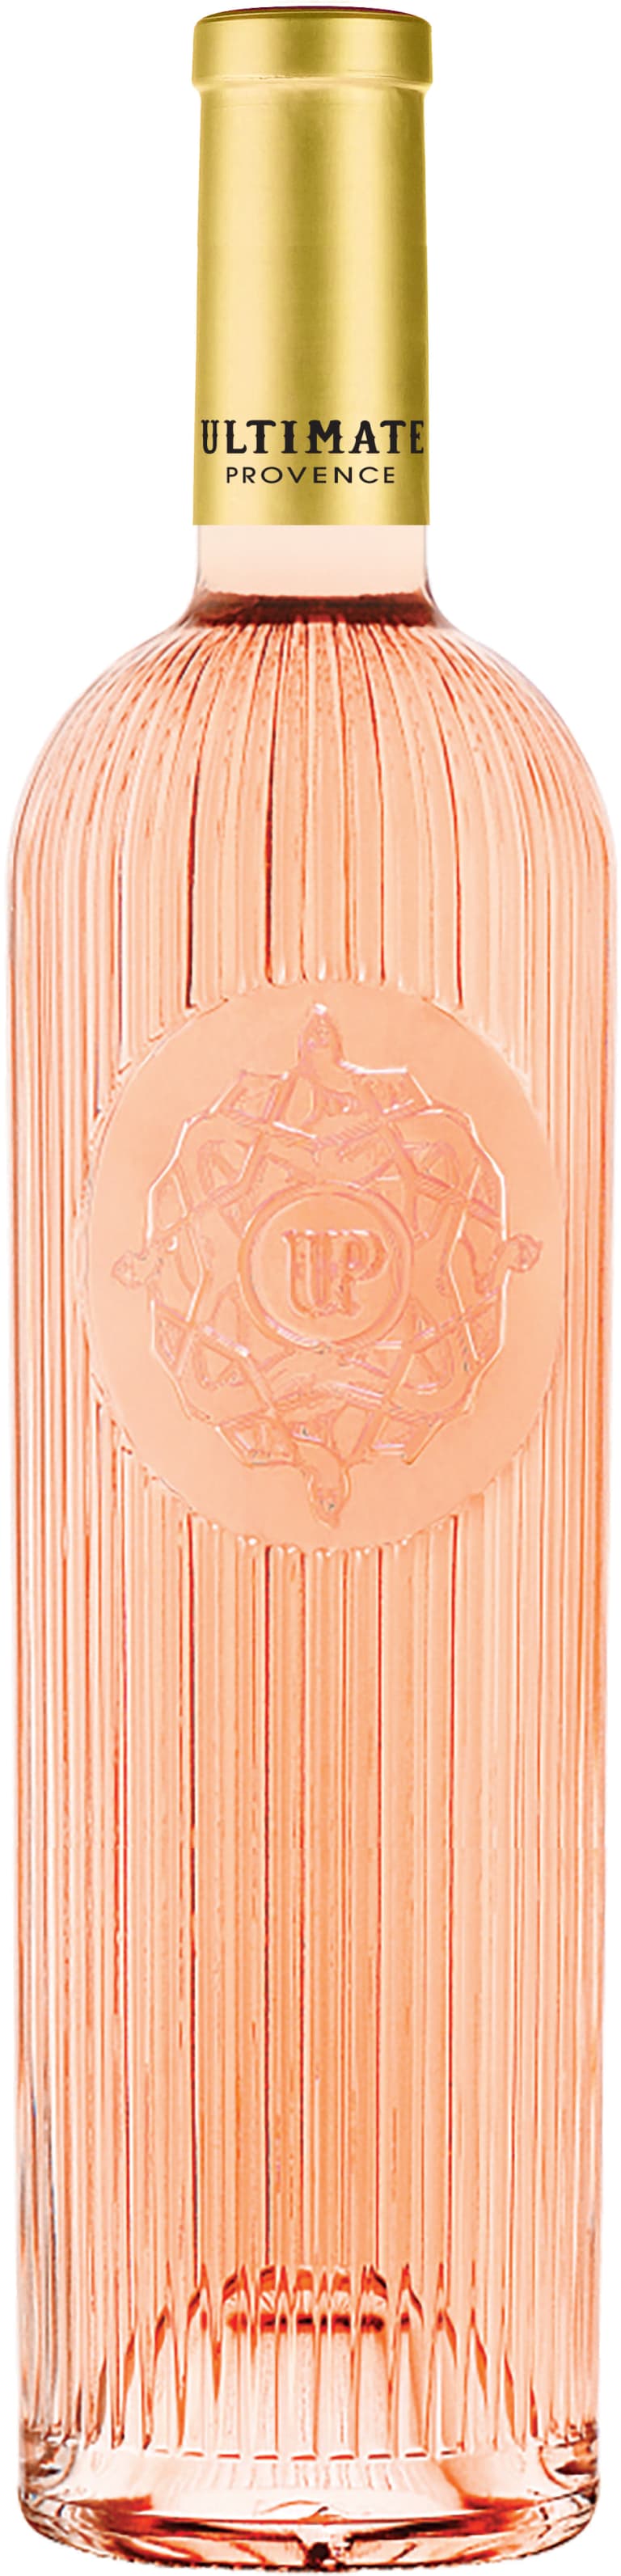 Ultimate Provence Rose Up 2019